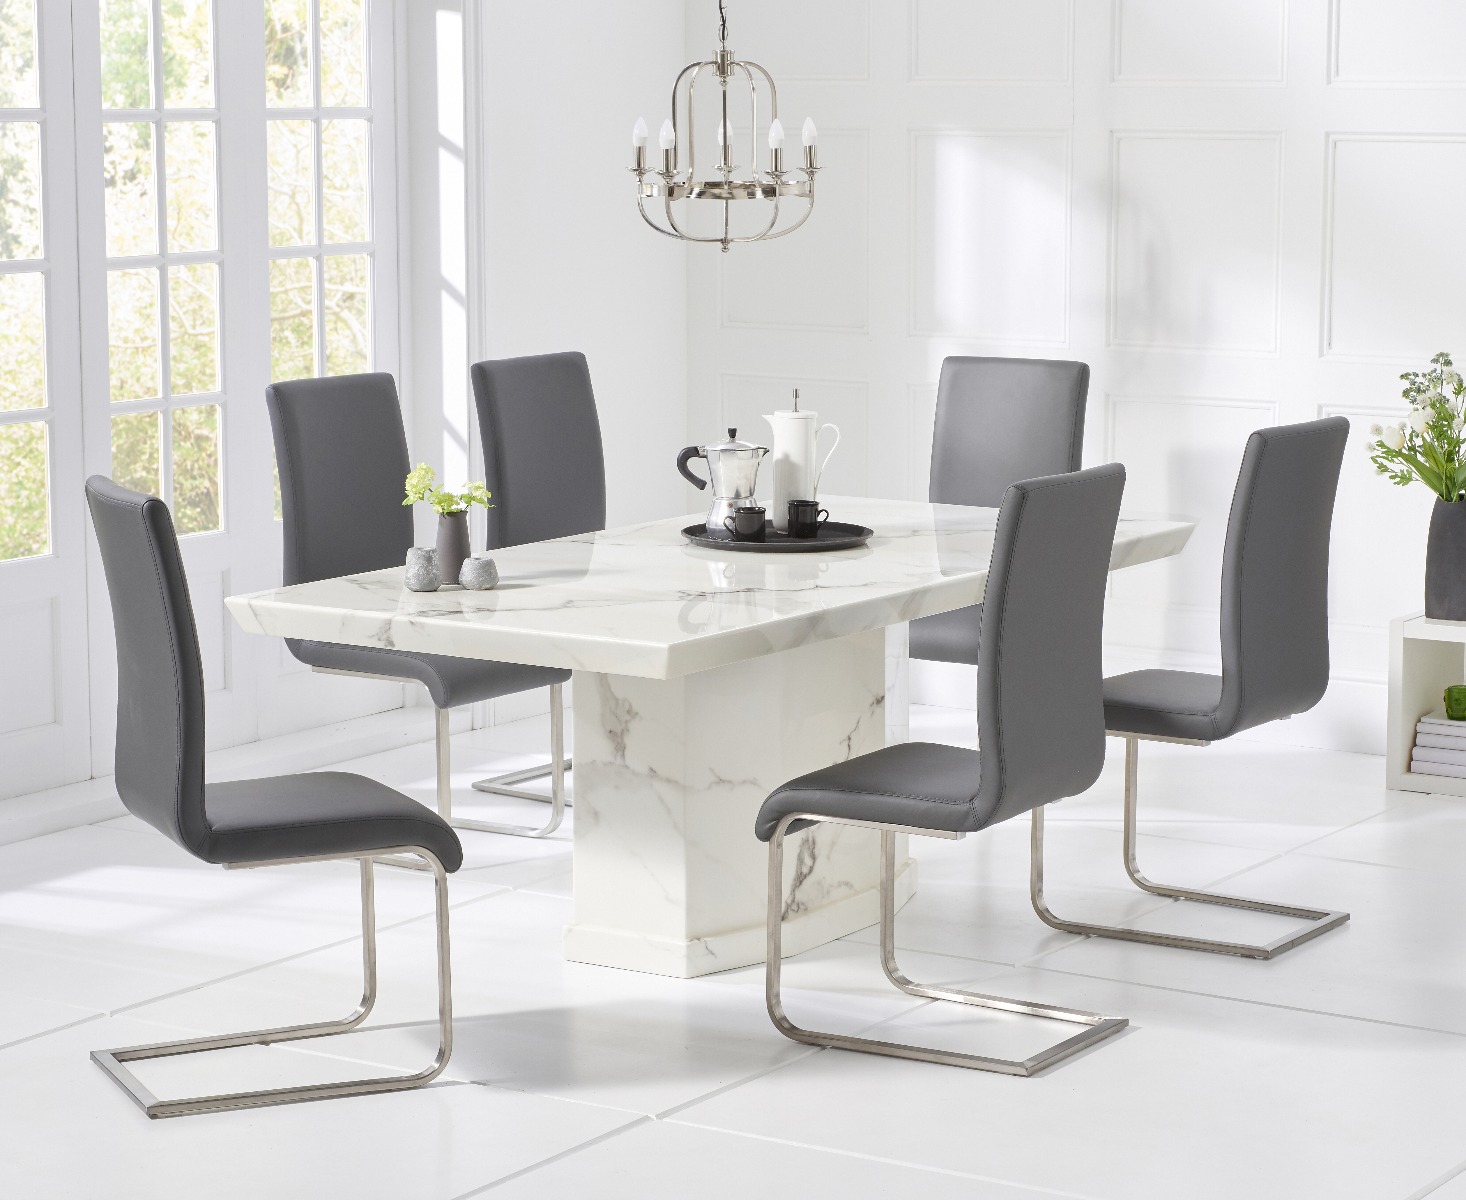 Carvelle 200cm White Pedestal Marble Dining Table With 12 White Malaga Chairs